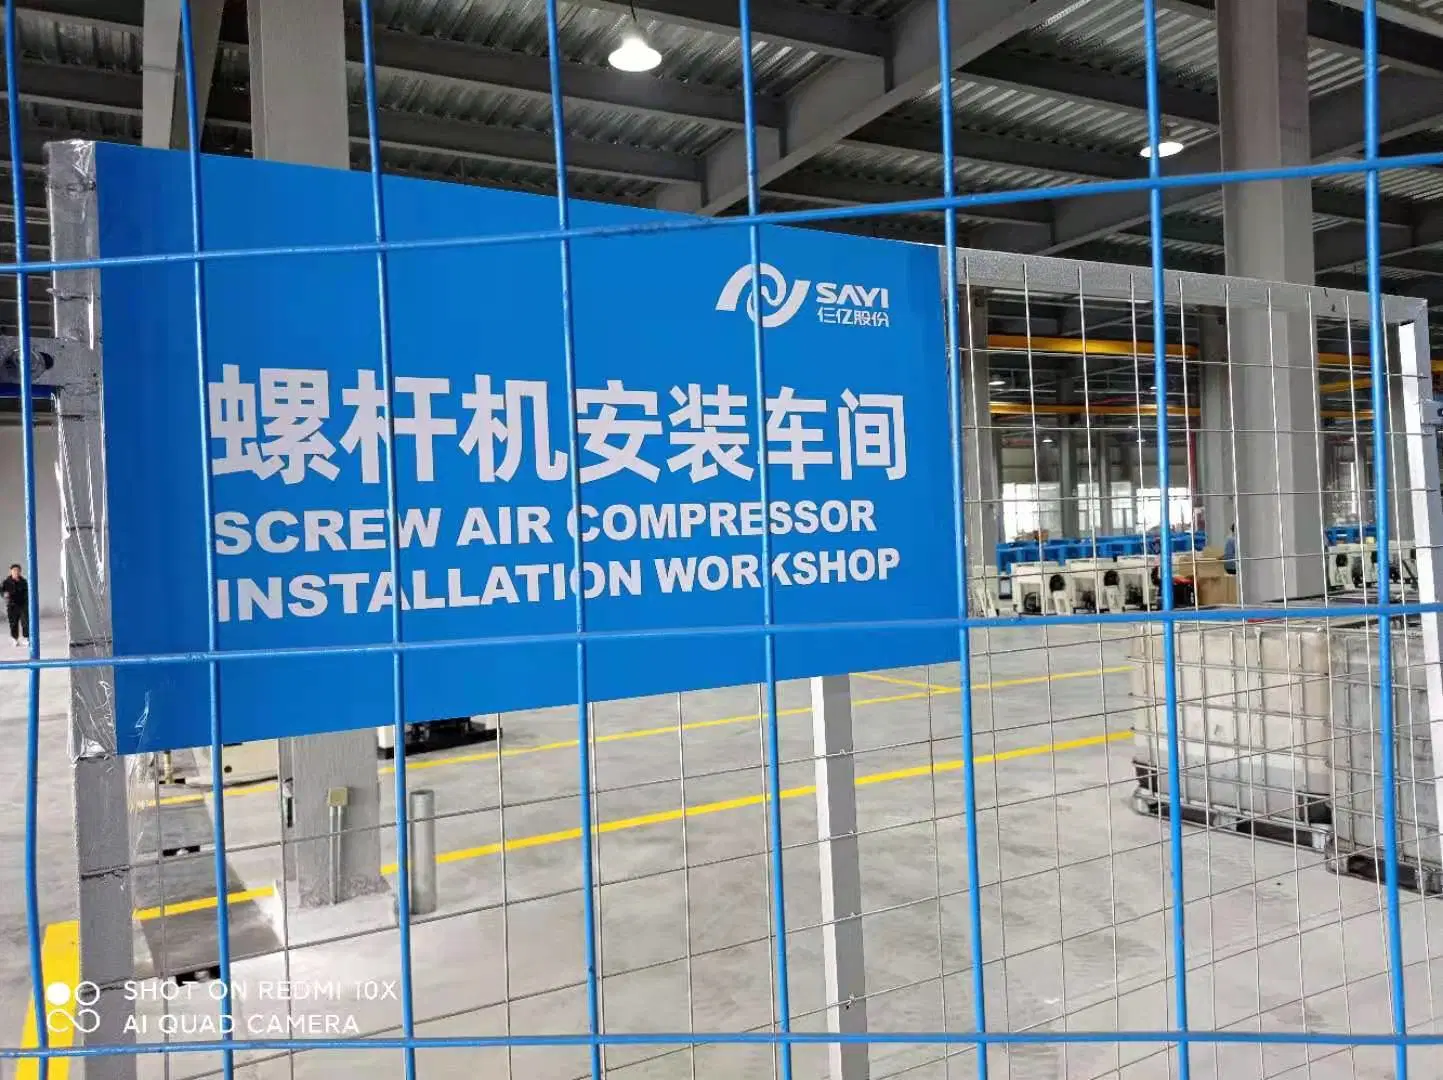 Two Stage Screw Air Compressor CE Apporved Heavy Industrial Plant Facility Construction Pharmacy Food Mining Oil Drill Energy Cost Saving Green Air Compressor